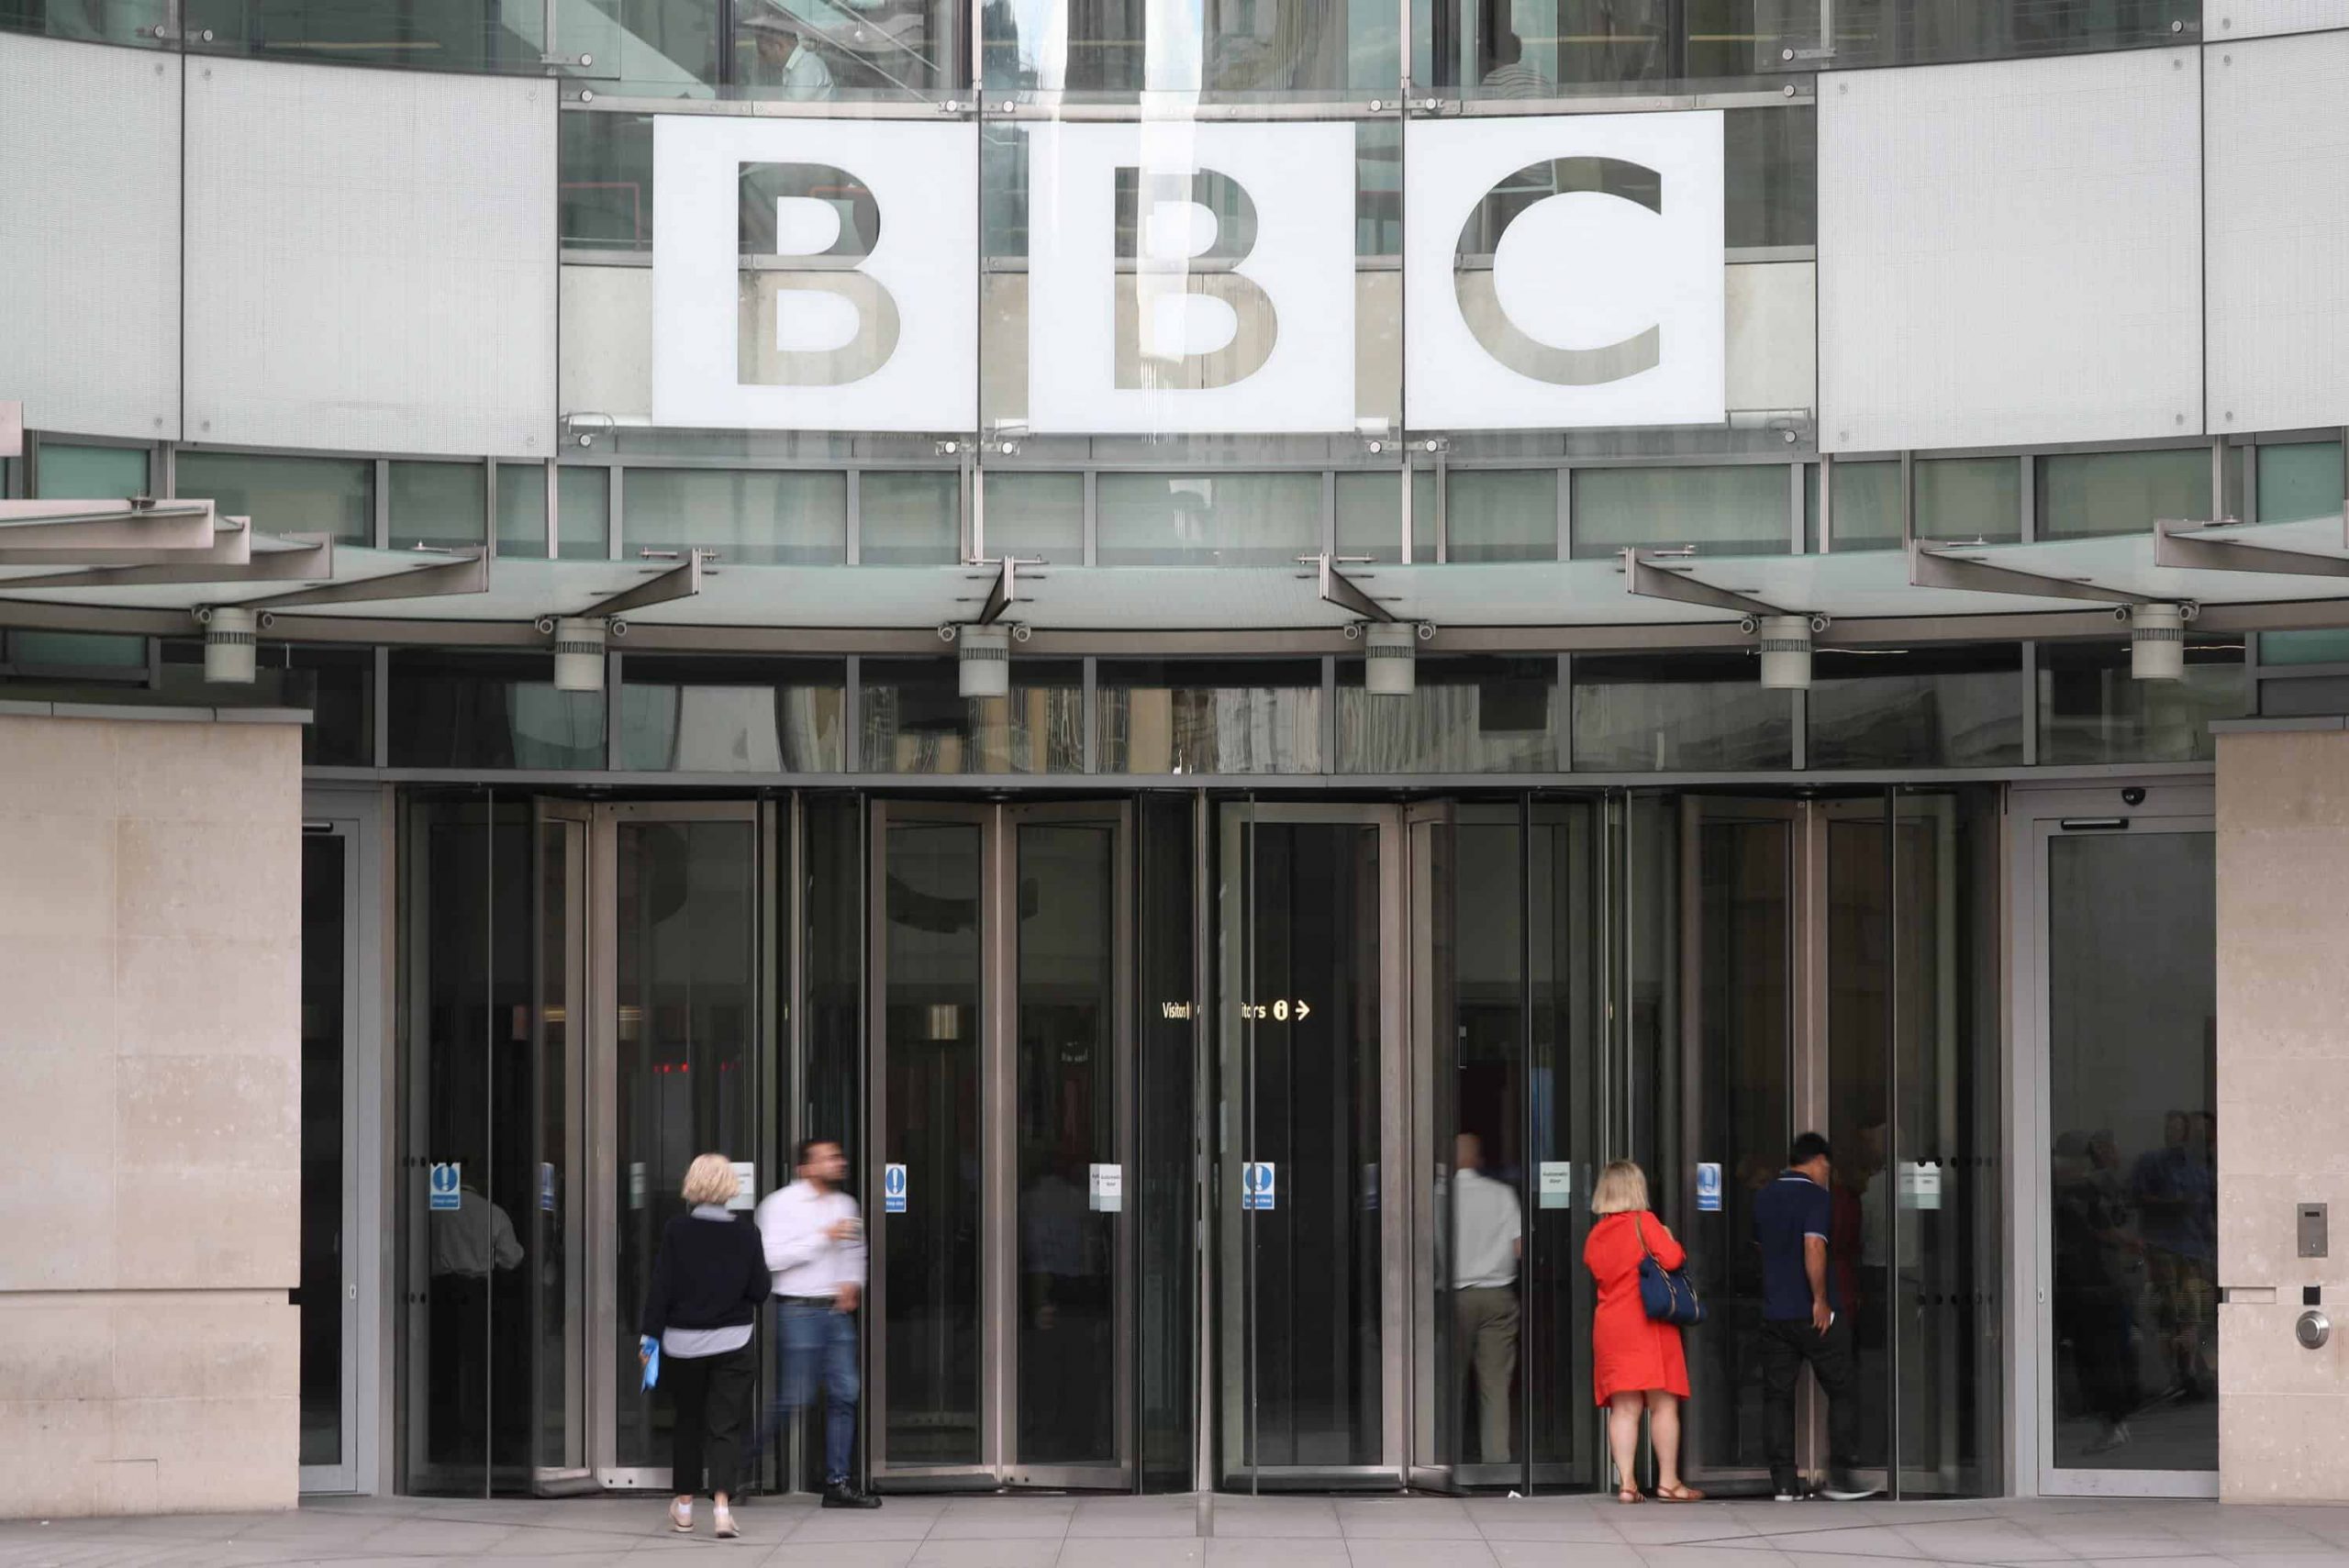 Labour accuses BBC of ‘biased’ election coverage in letter to director general